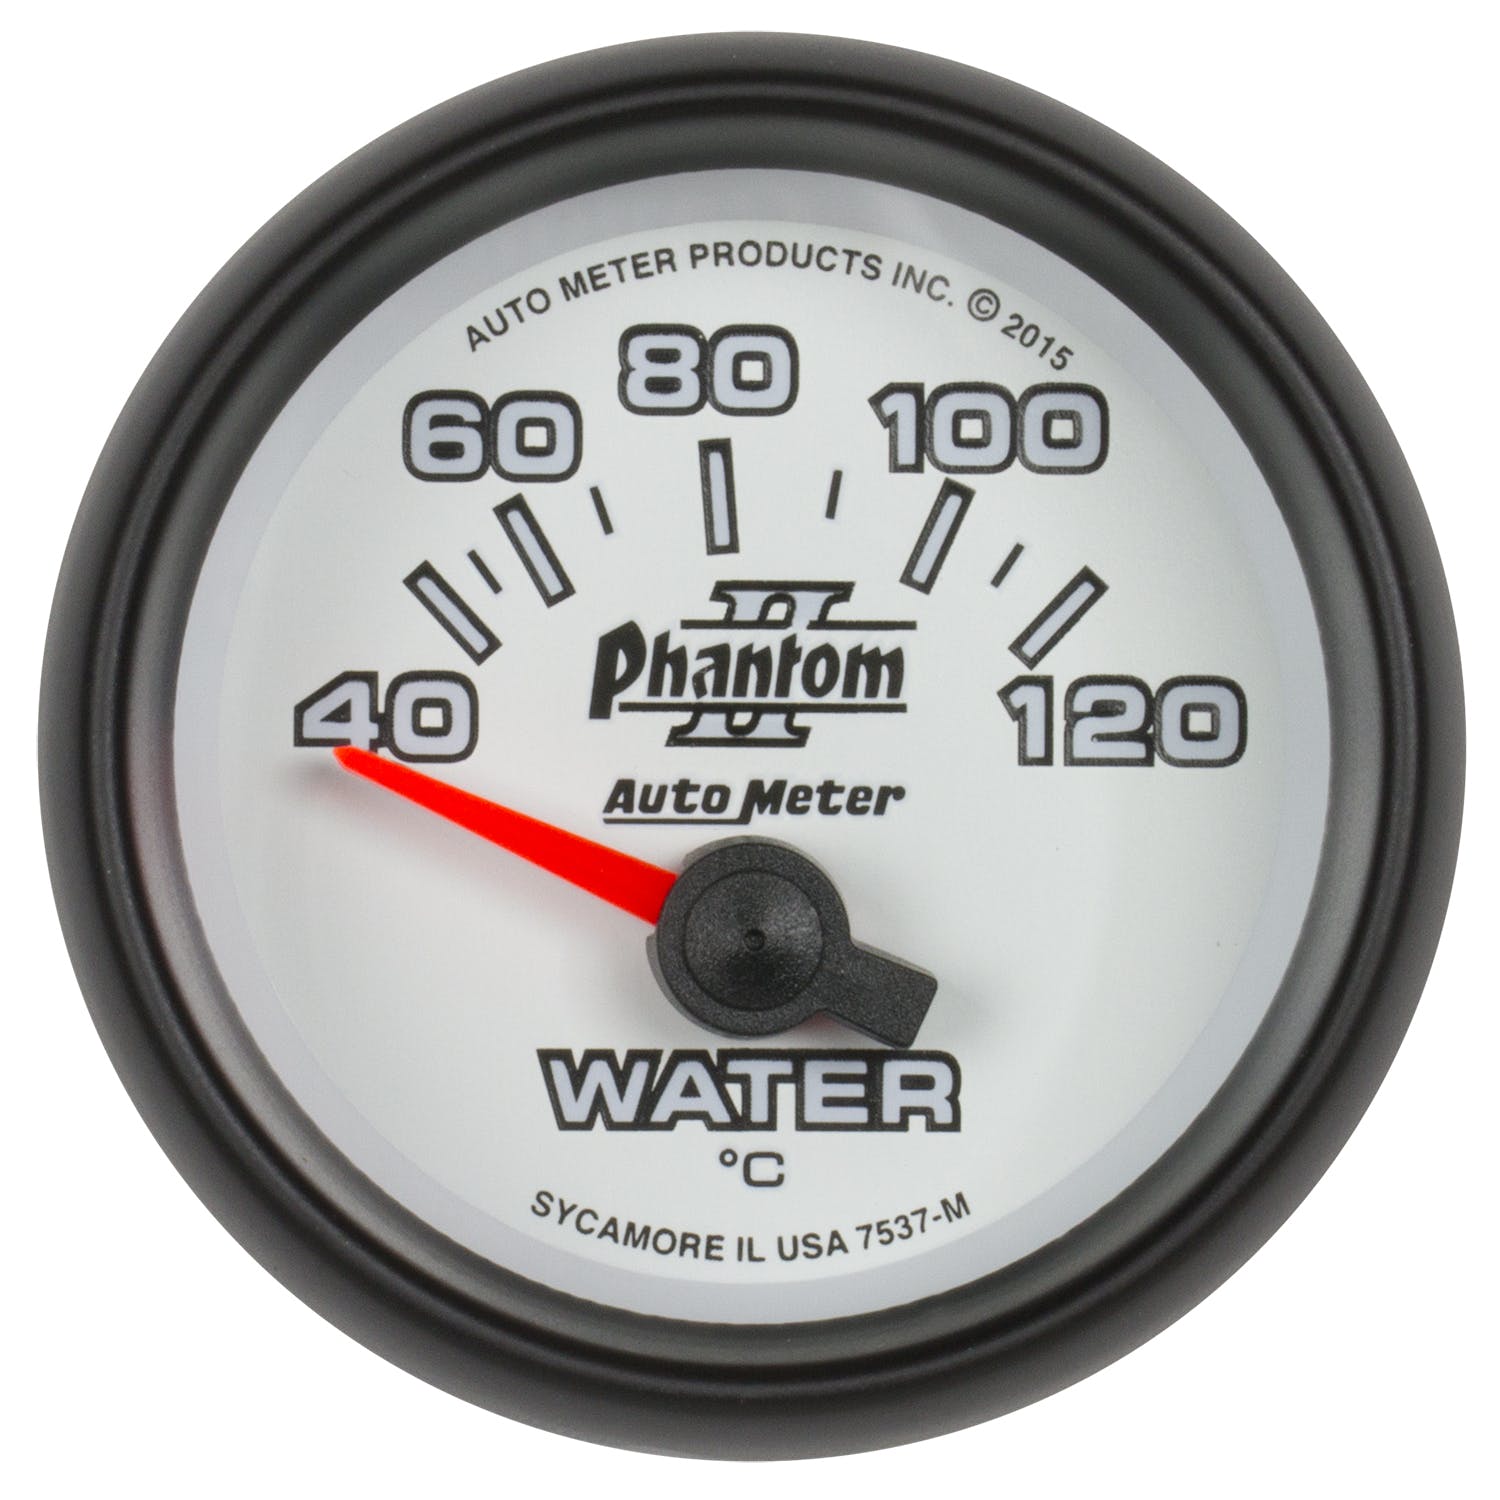 AutoMeter Products 7537-M Water Temperature Gauge, 2 1/16 40-120, Electric, Phantom II